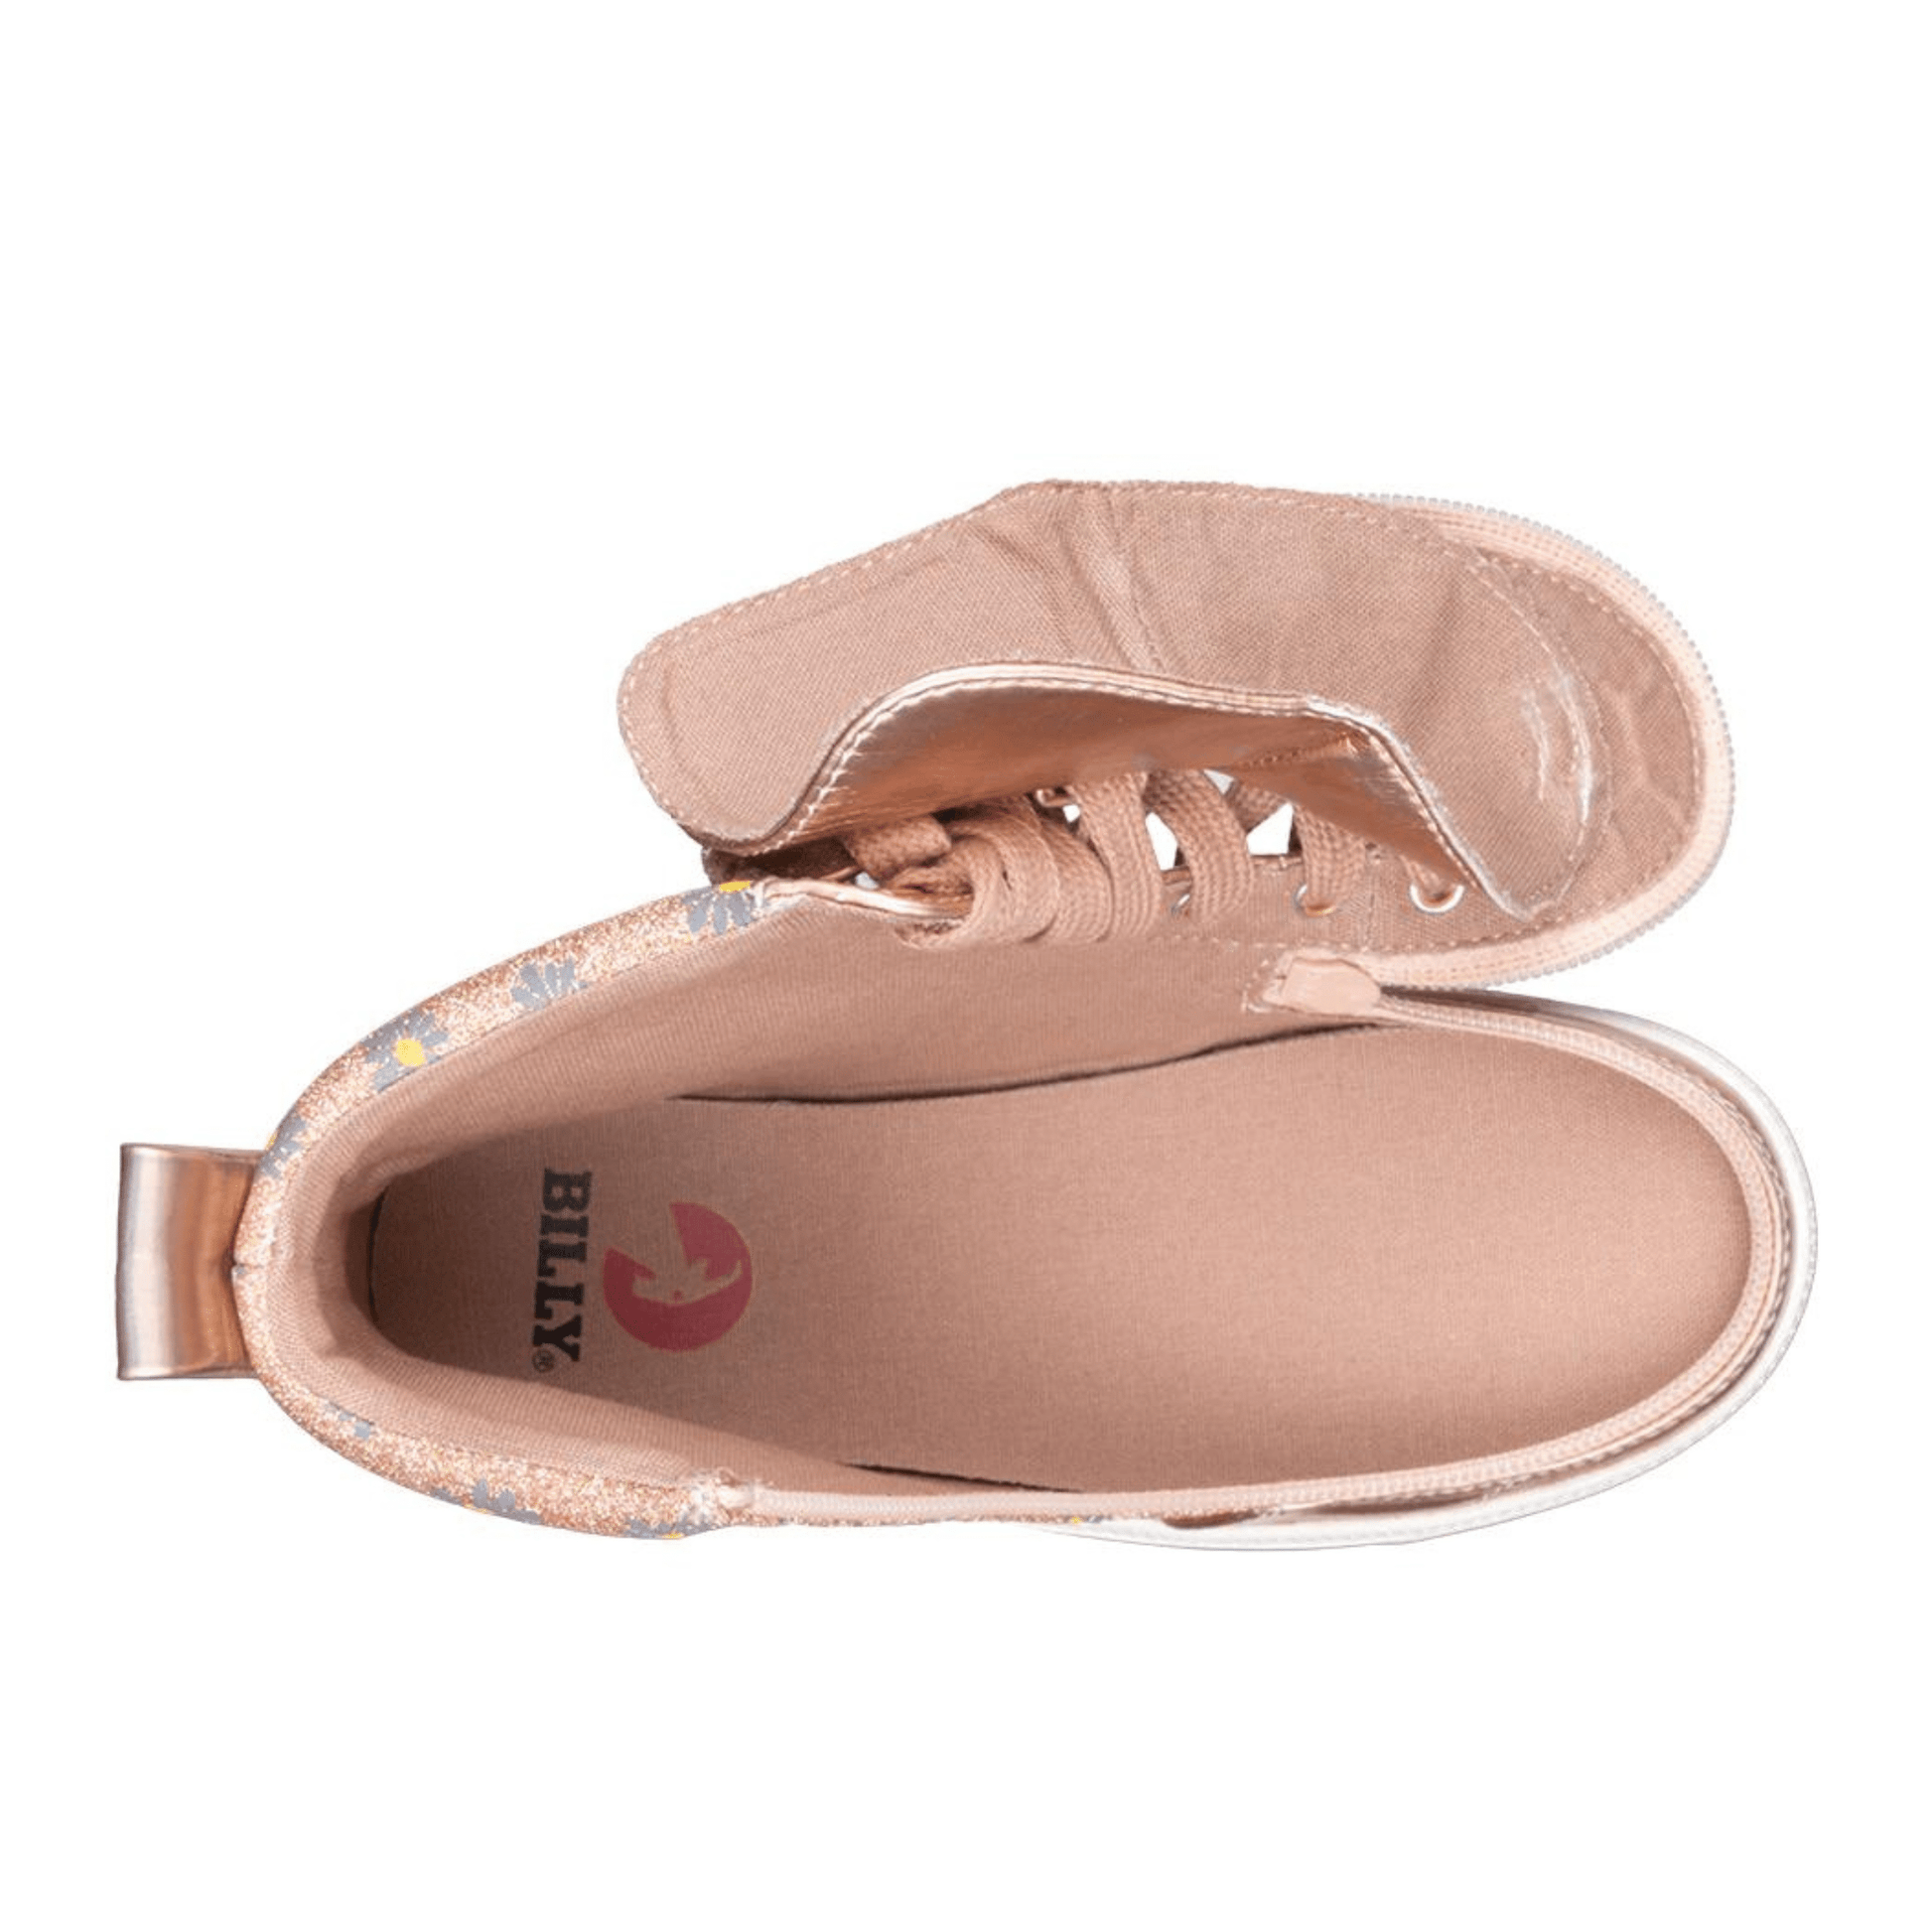 Billy Footwear High Tops Billy Footwear - Rose Gold Daisy BILLY Classic Lace High